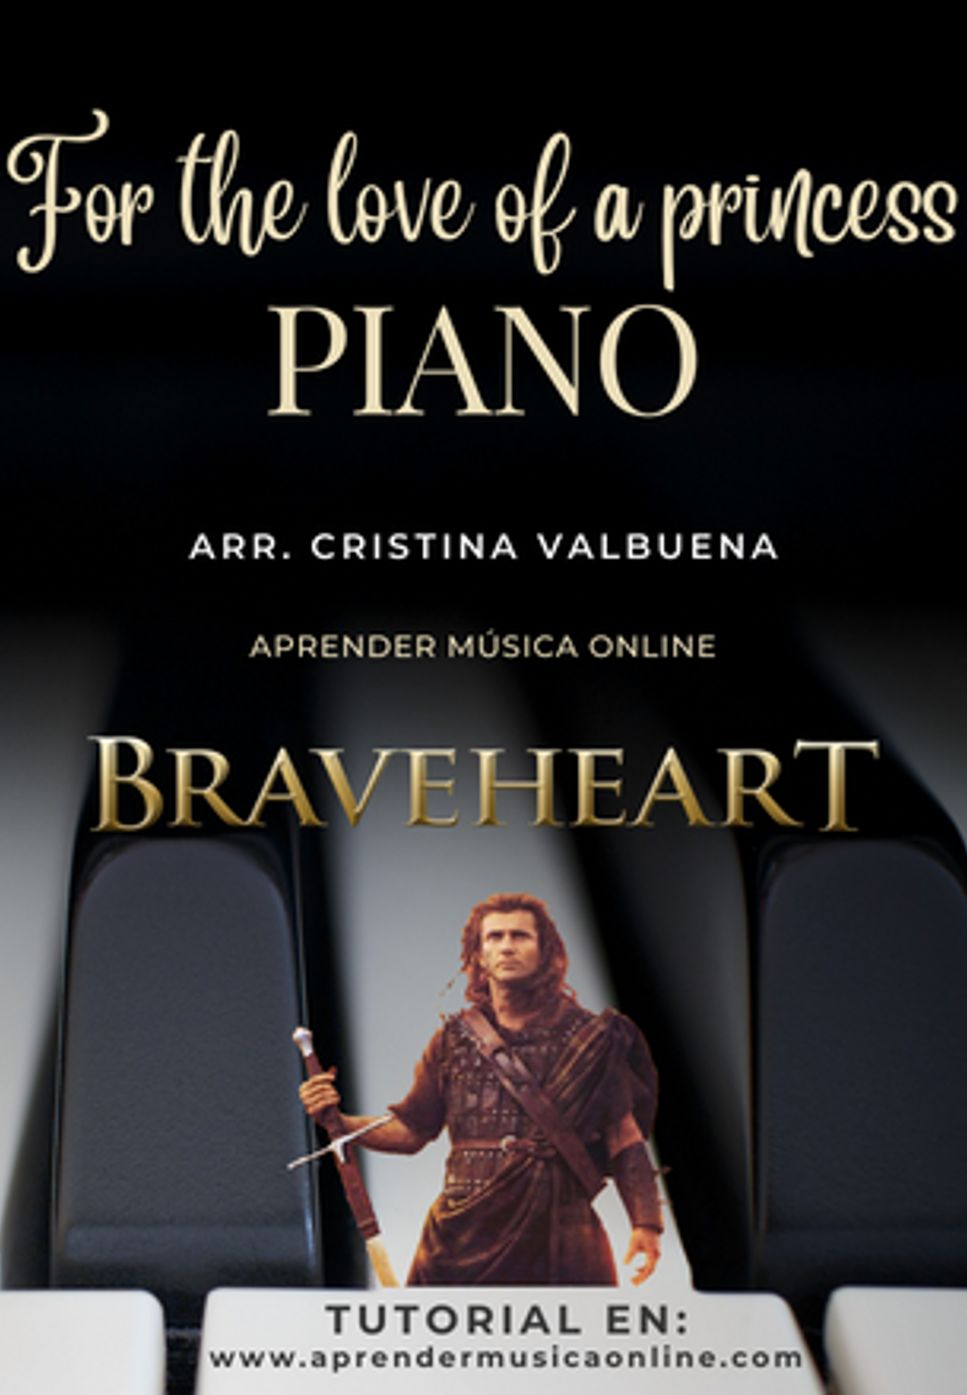 James Horner - For the love of a princess B.S.O. Braveheart by Cristina Valbuena